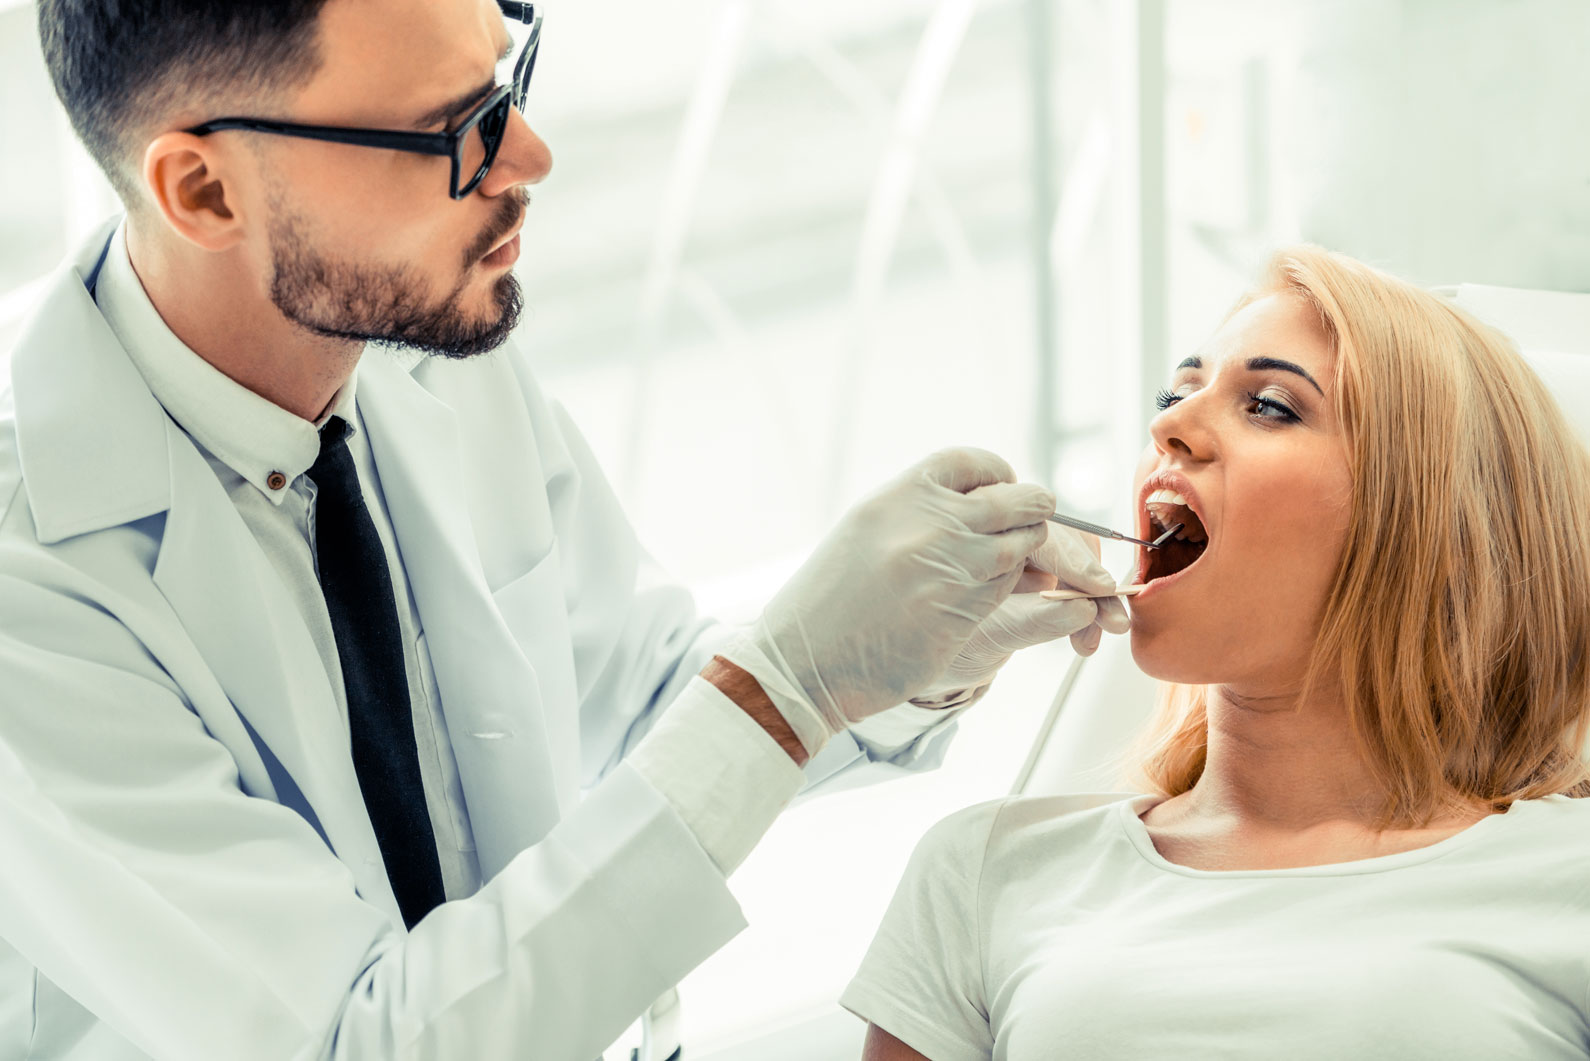 Dentist Examining the Teeth of a Patient